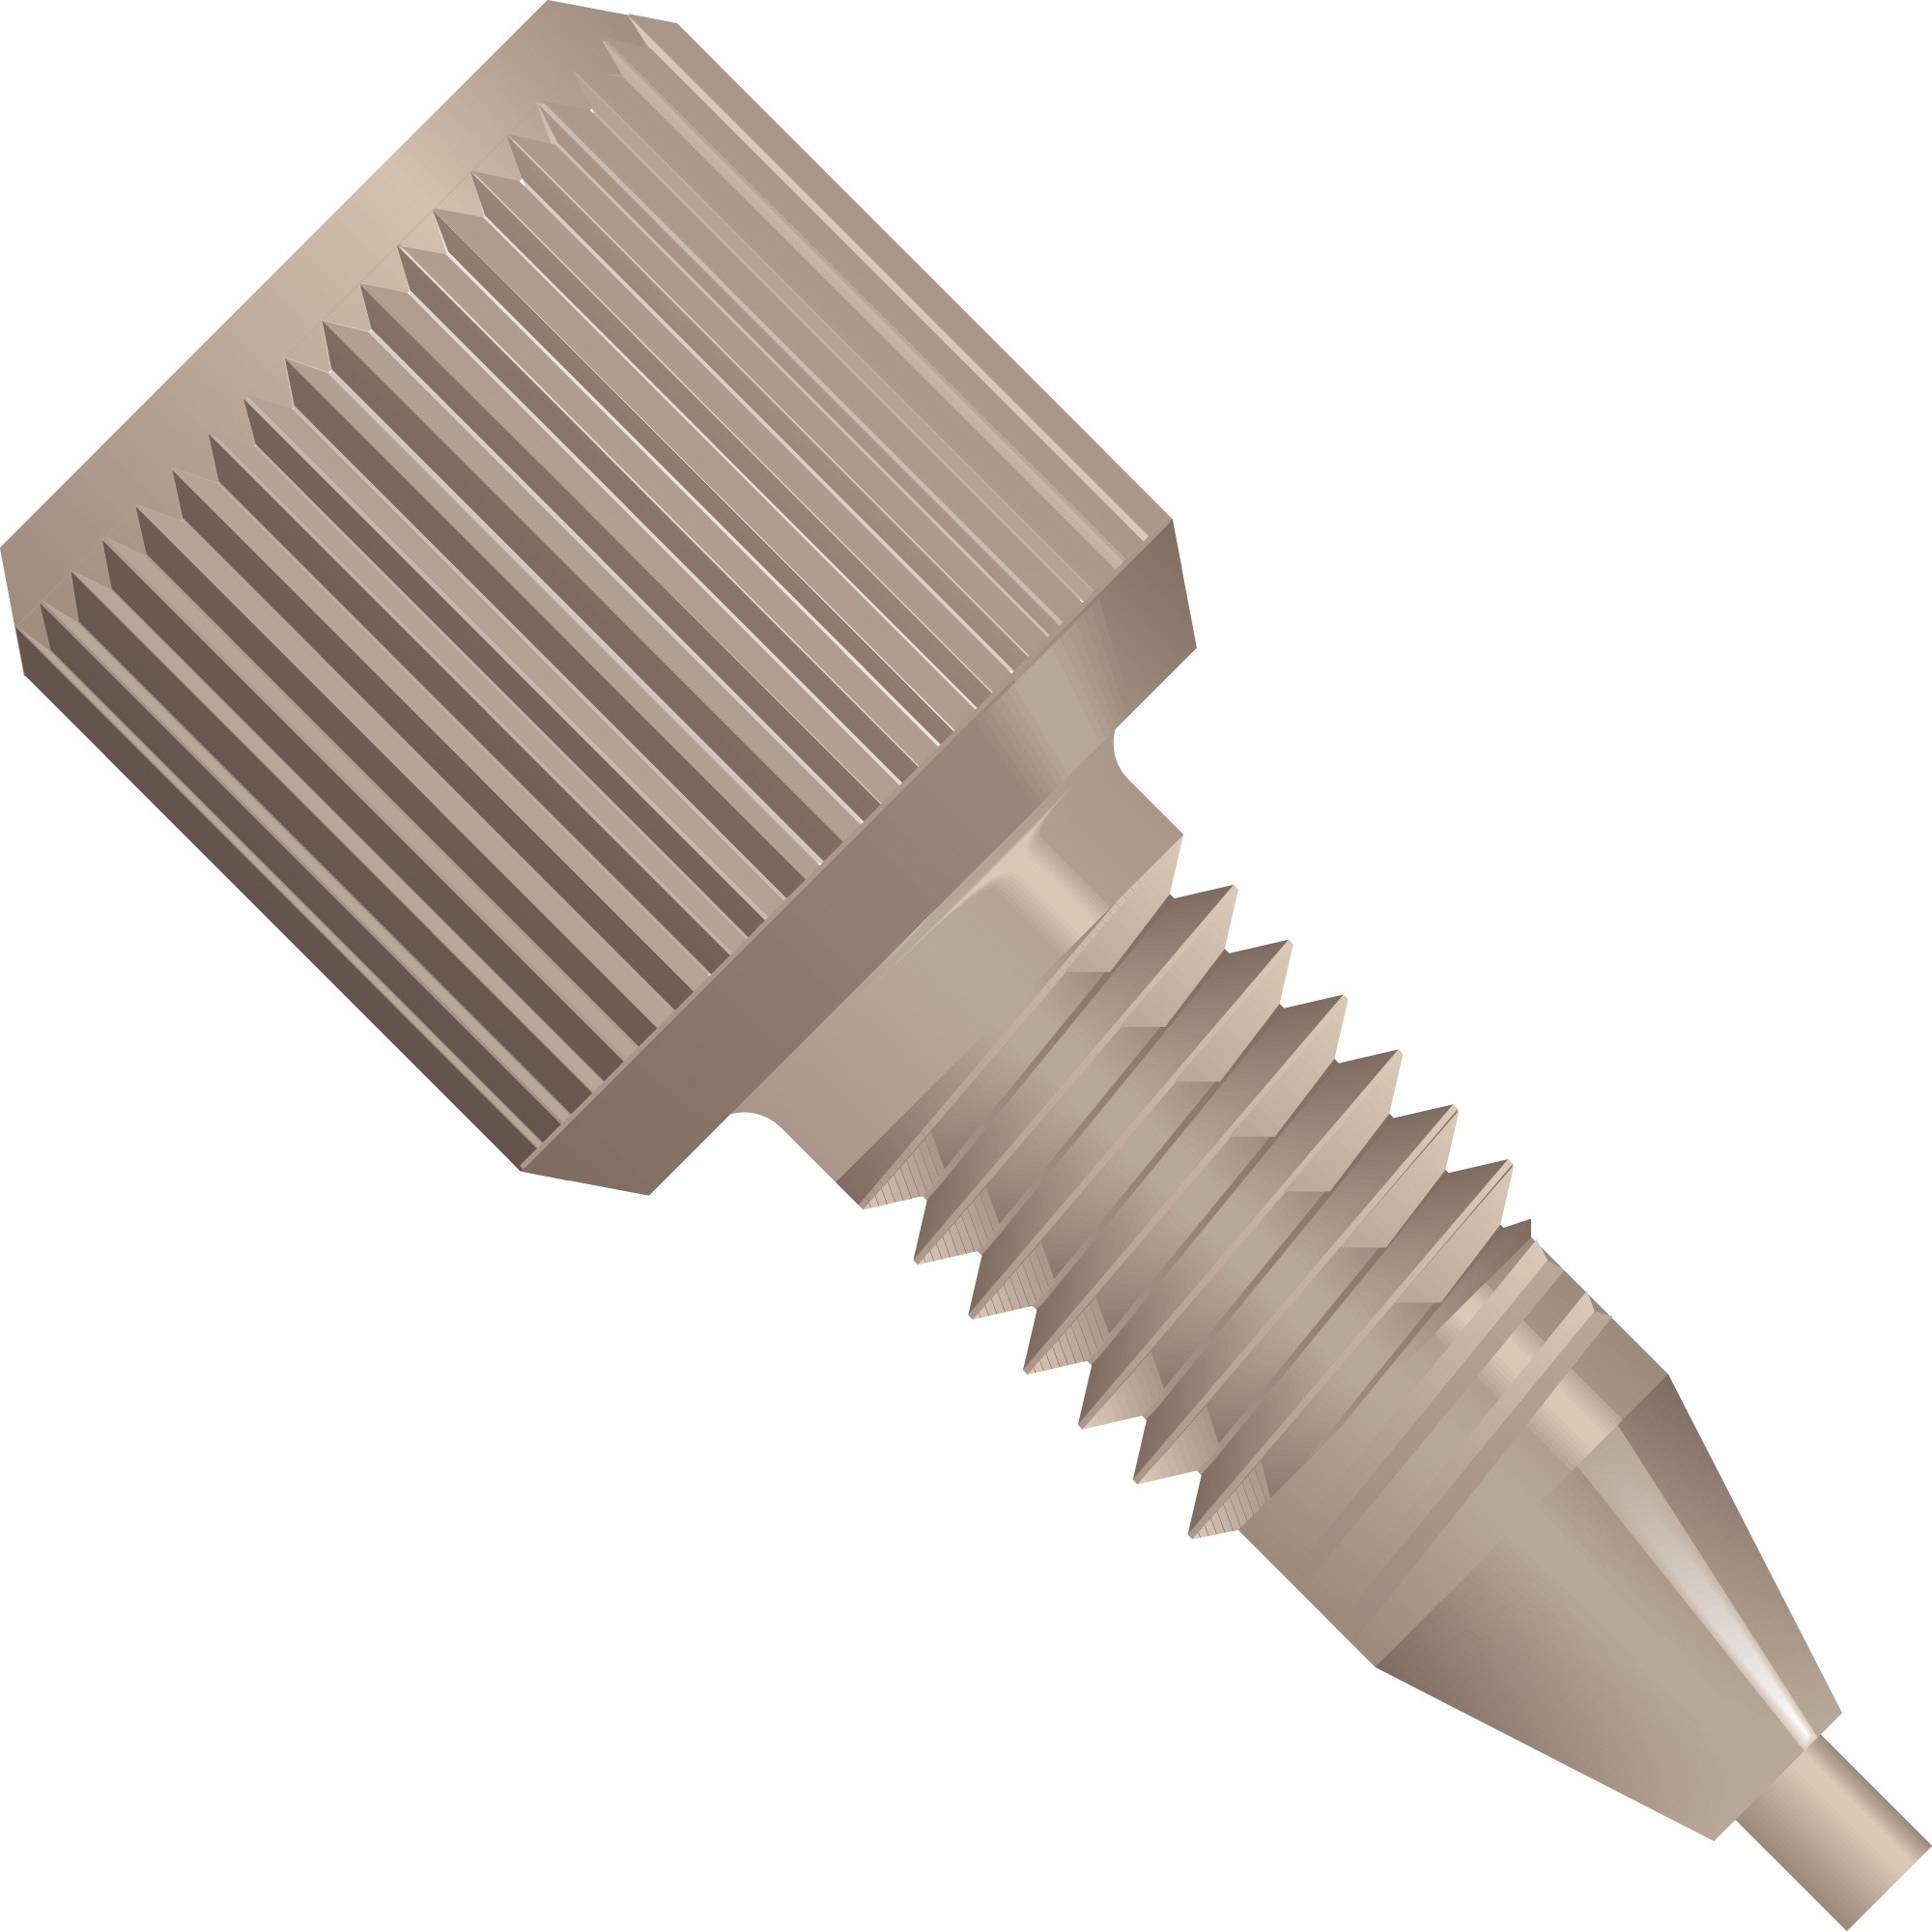 Adapters & Connectors: Threaded  Adapter, 1/4"-28 Flat Bottom (Female) to 10-32 Coned (Male), PEEKâ¢